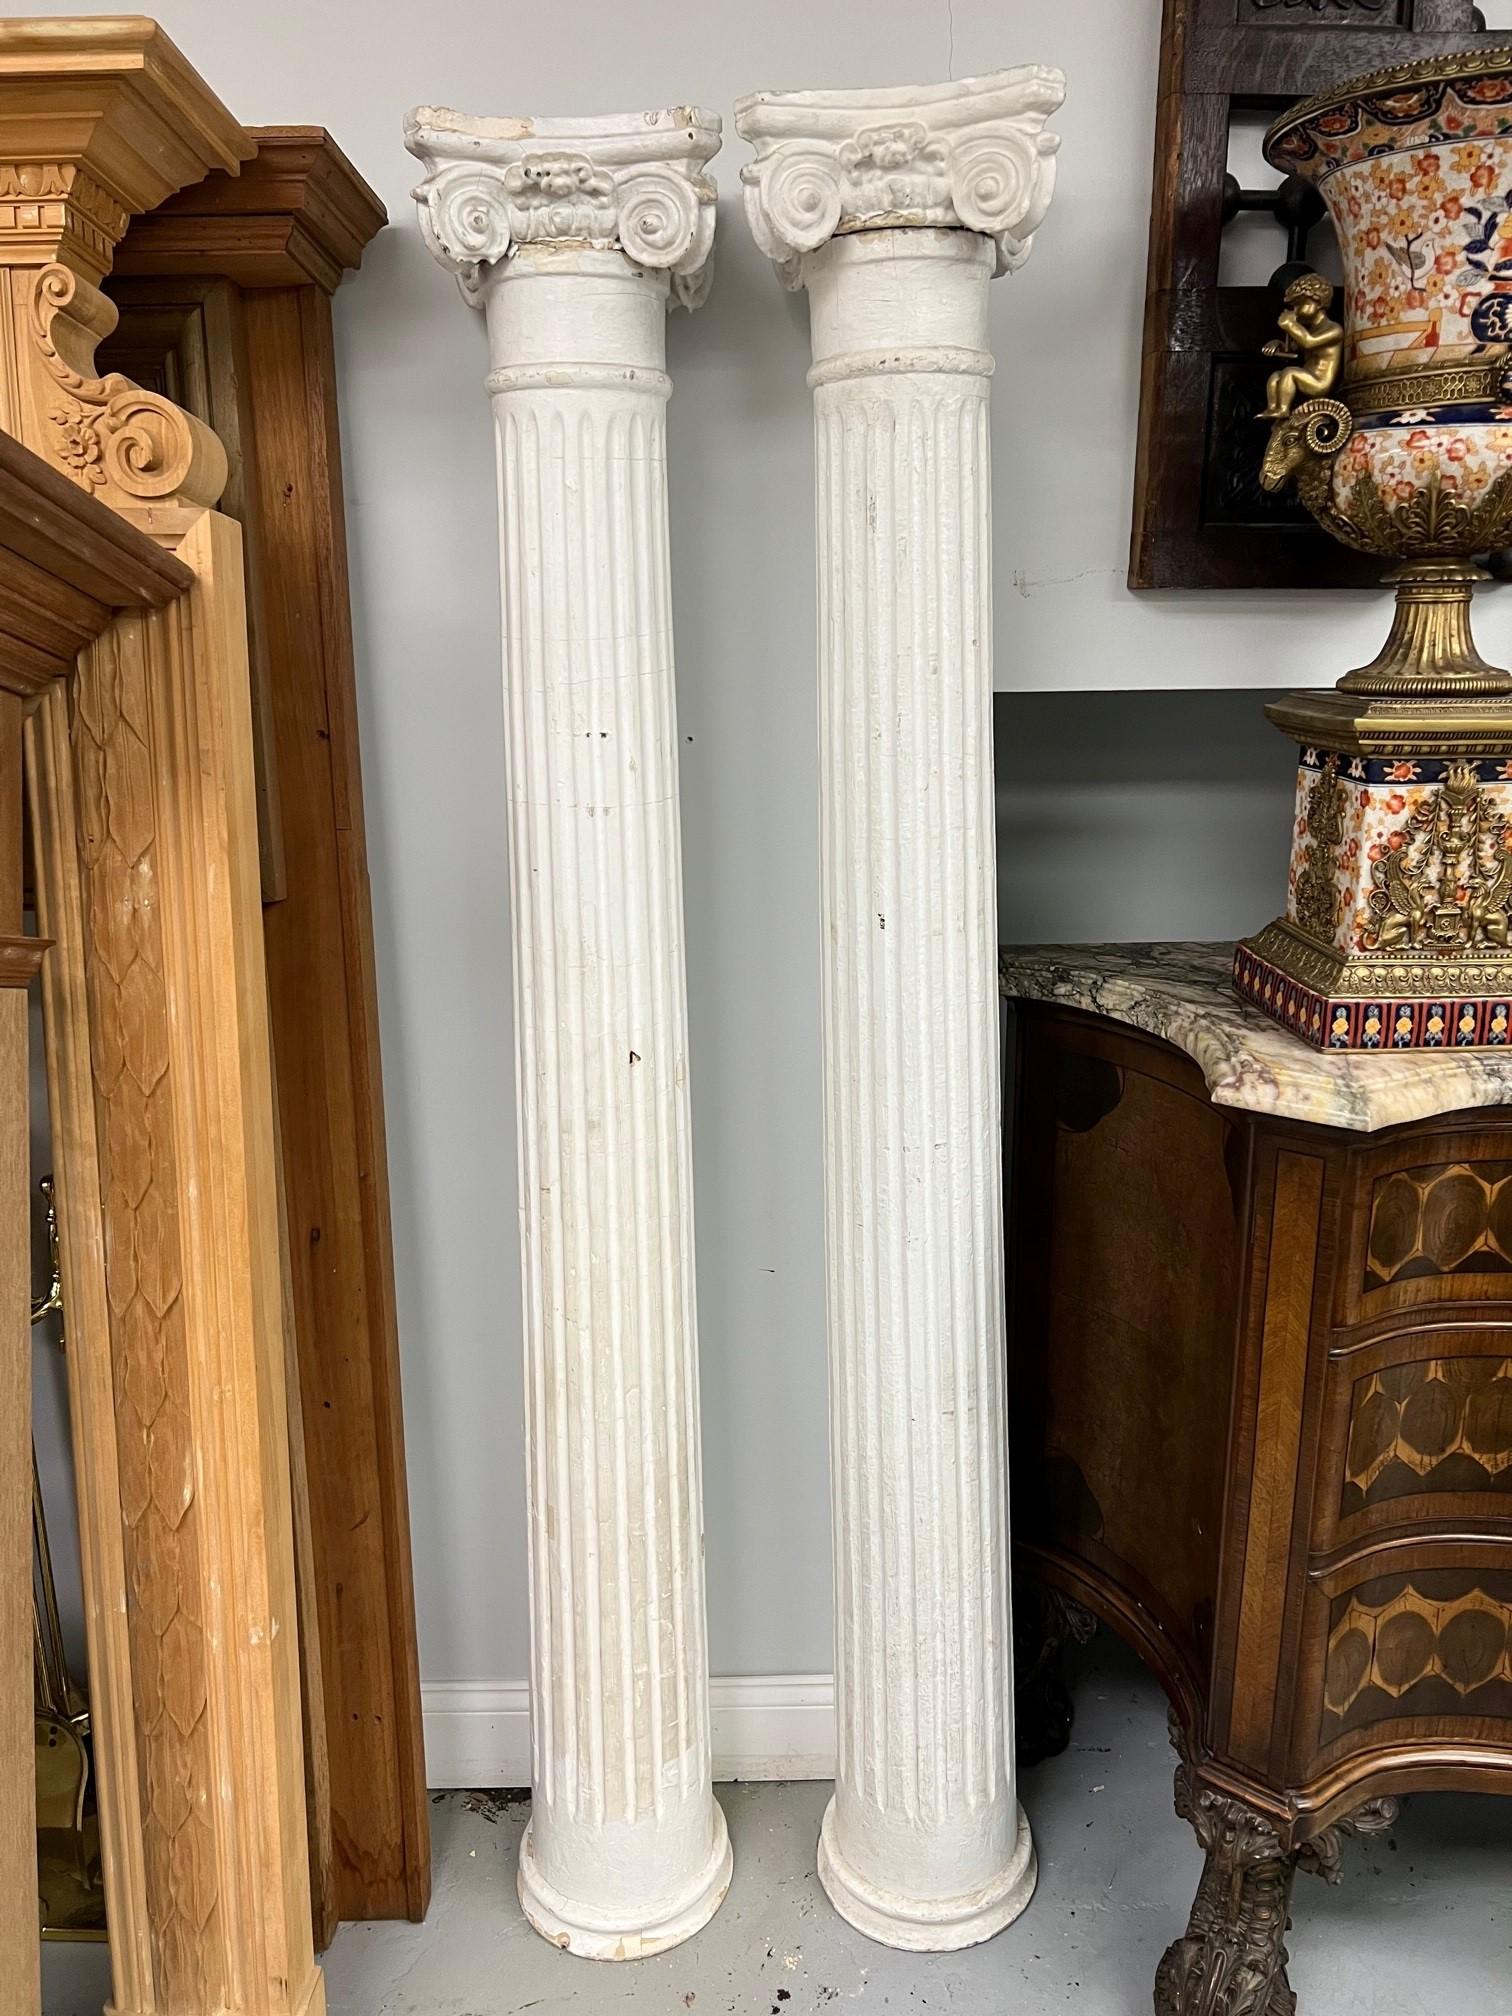 A nice pair of early 20th century American architectural fluted wood columns with Ionic capitals. The capitals are made of a composition maybe plaster and the columns are wood. This pair of columns would look great on either side of an entrance or